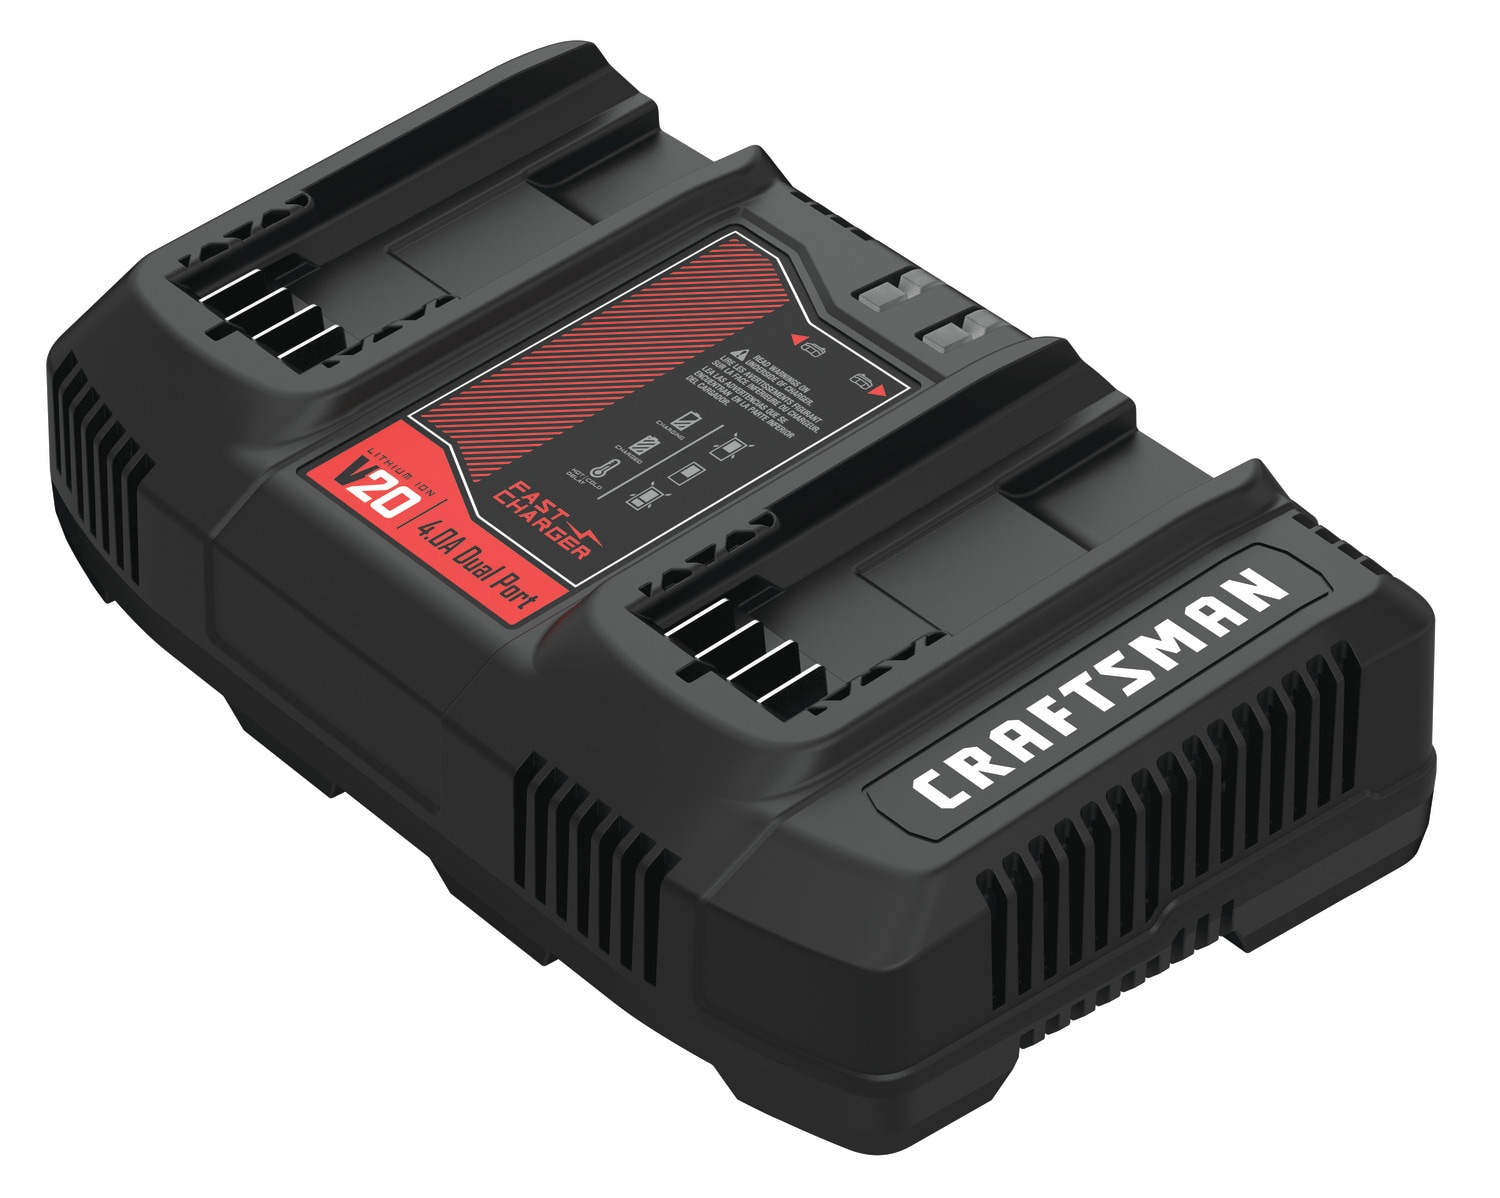 CRAFTSMAN V20 20-V Lithium-ion Battery Charger in the Power Tool